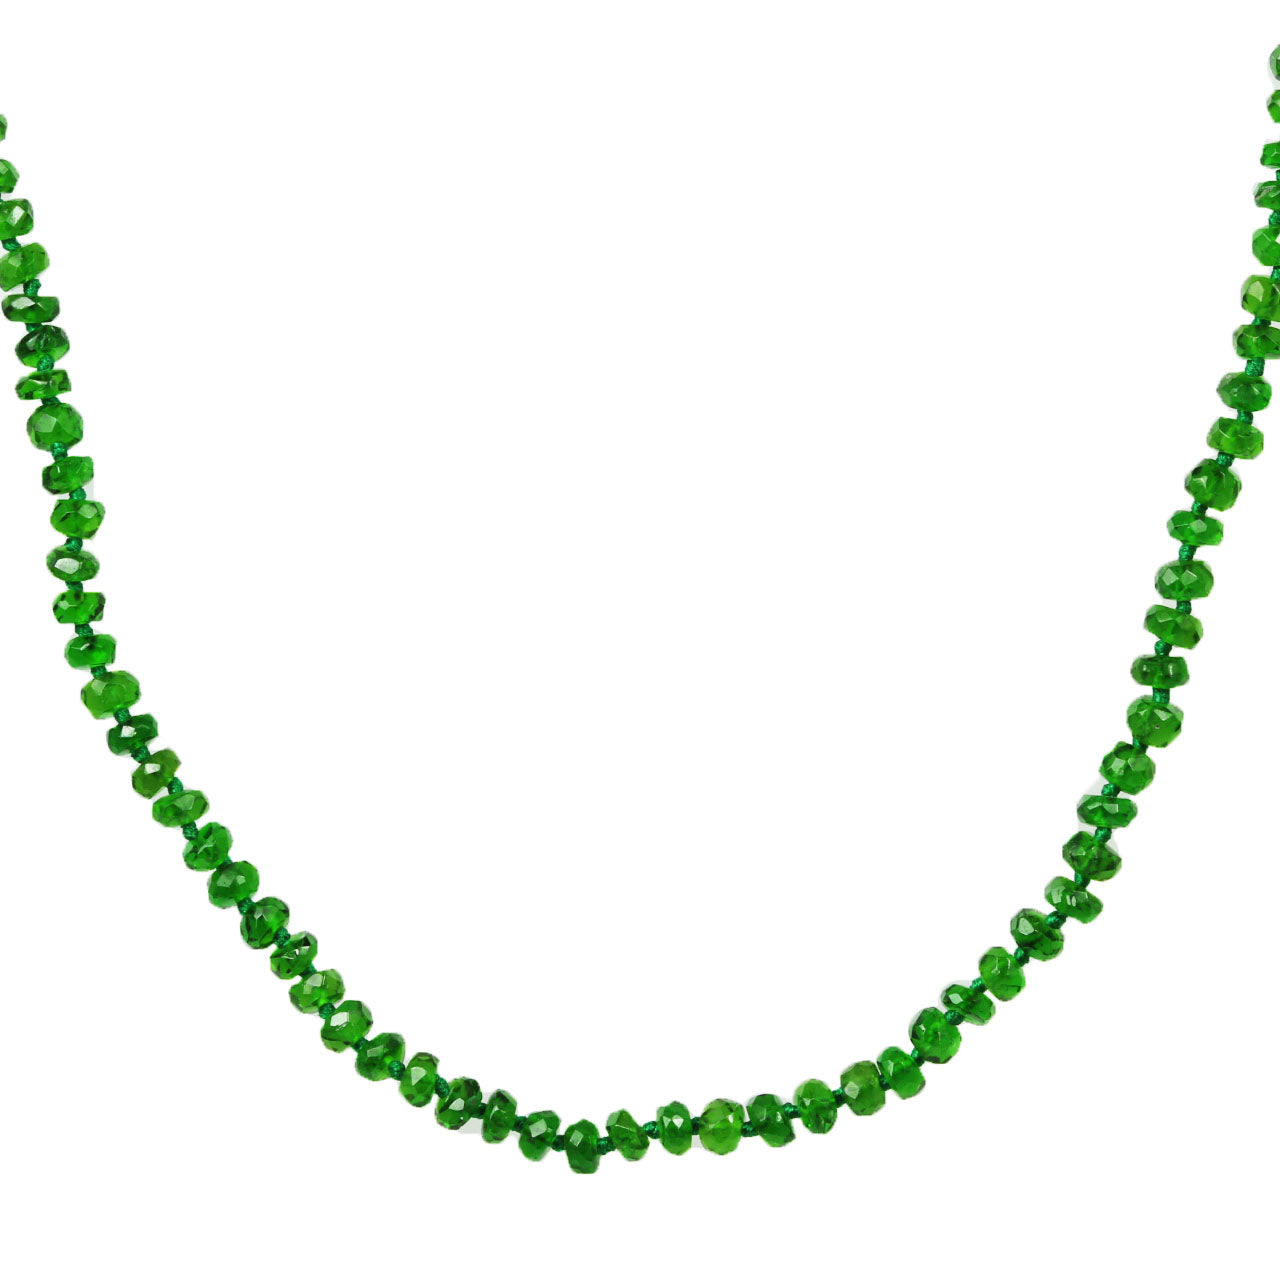 Chrome Diopside Bead Necklace